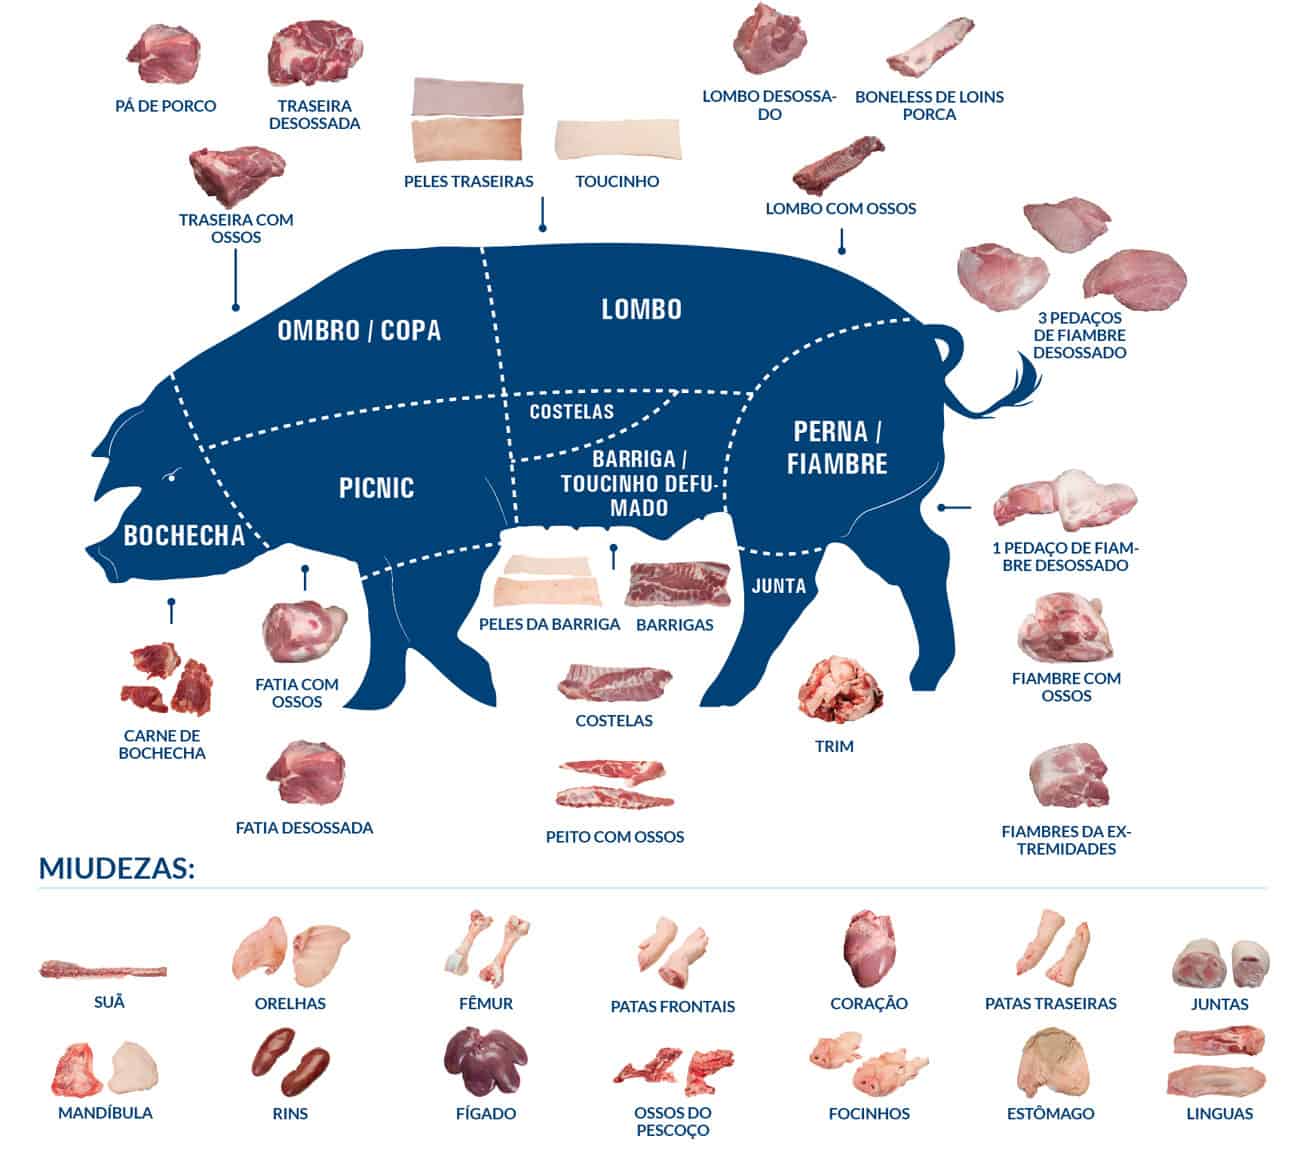 wholesale pork products